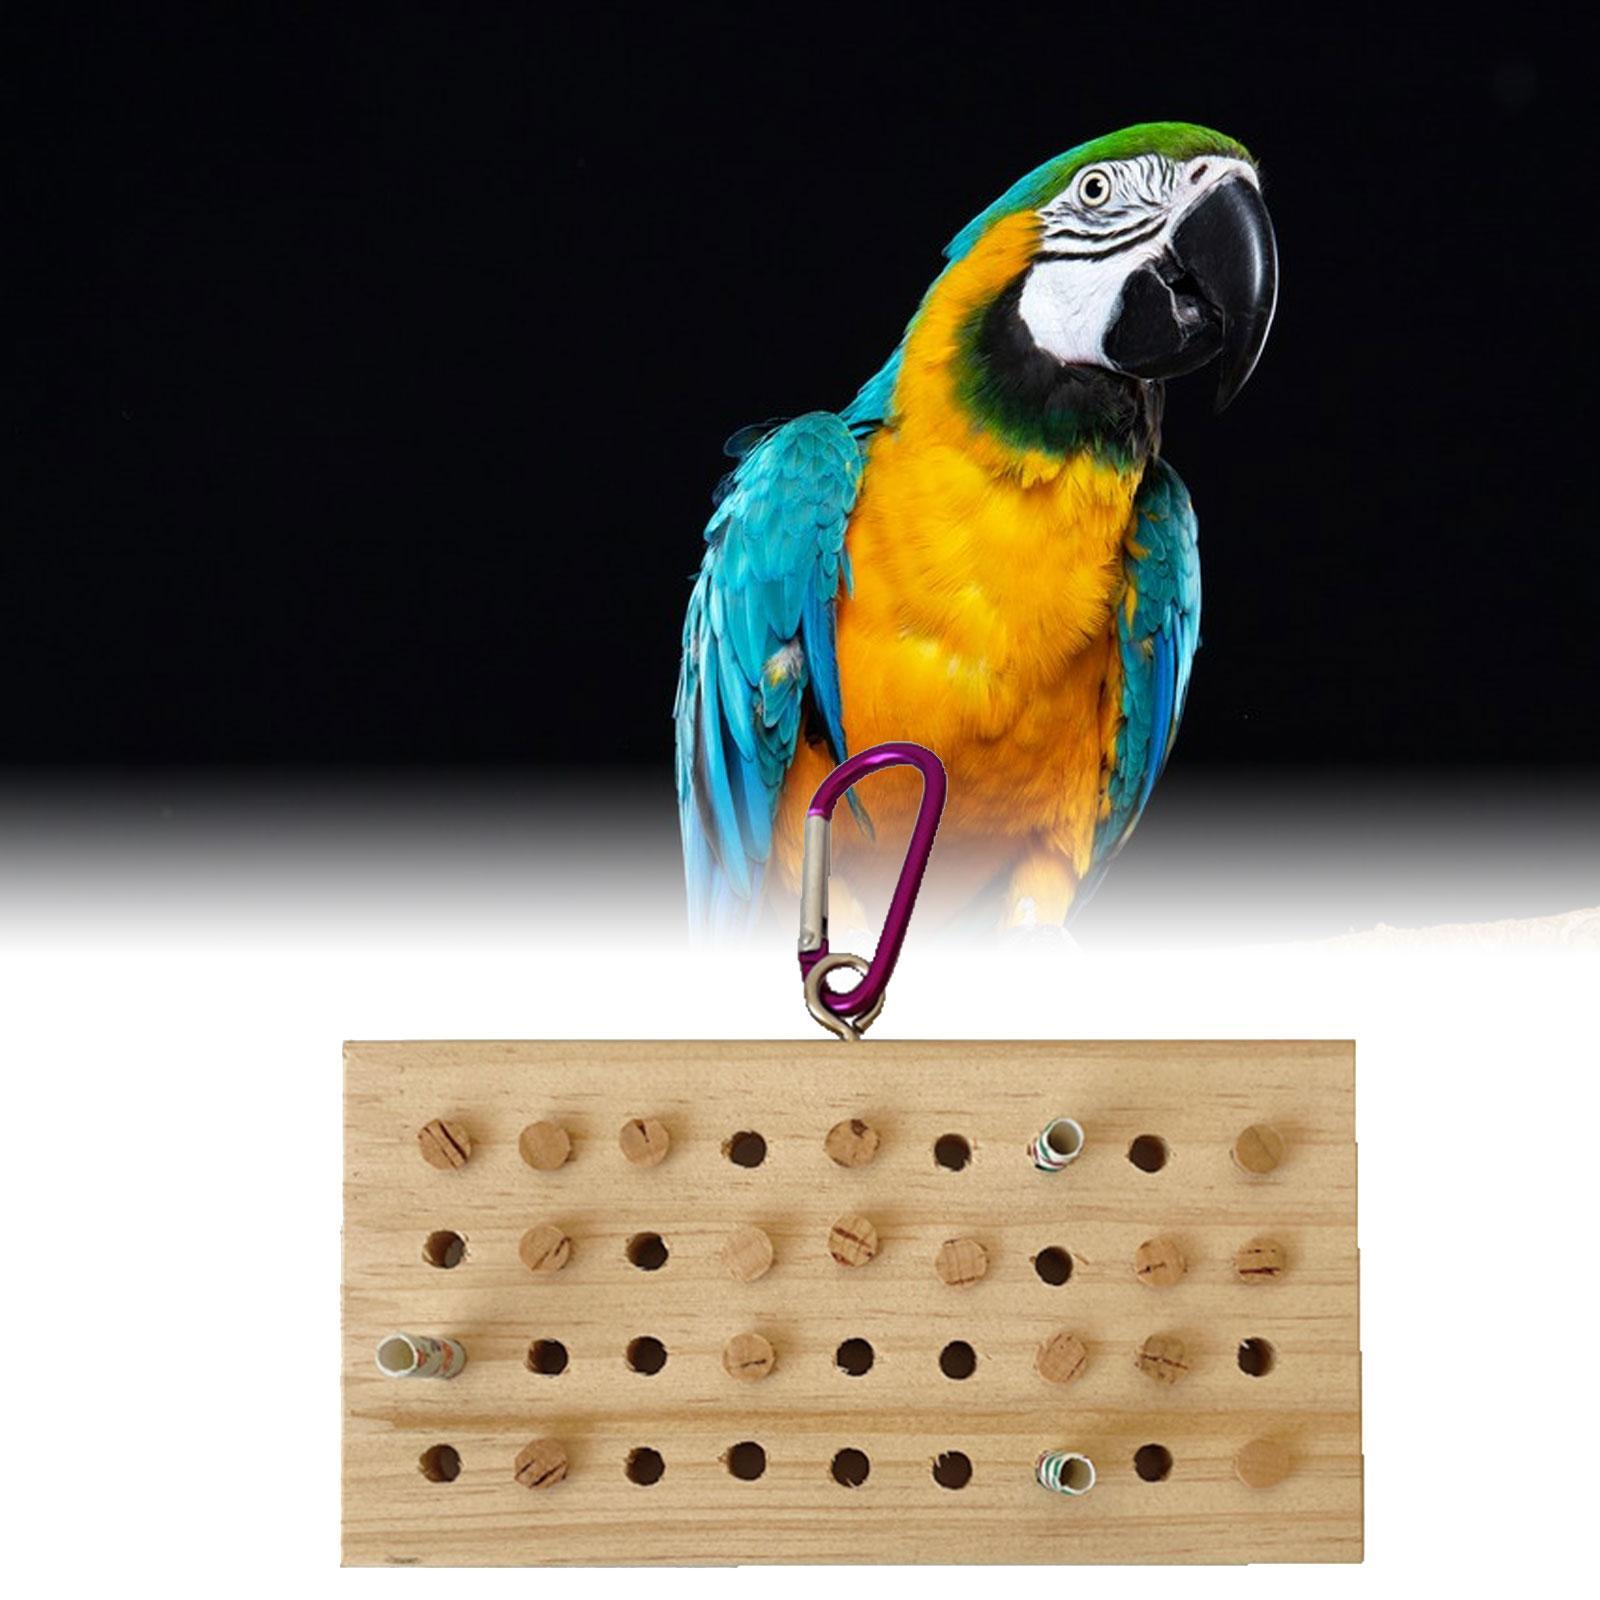 Parrot Bird Toy Budgies Bird Accessories Finches Parrotlets Bird Chewing Toy